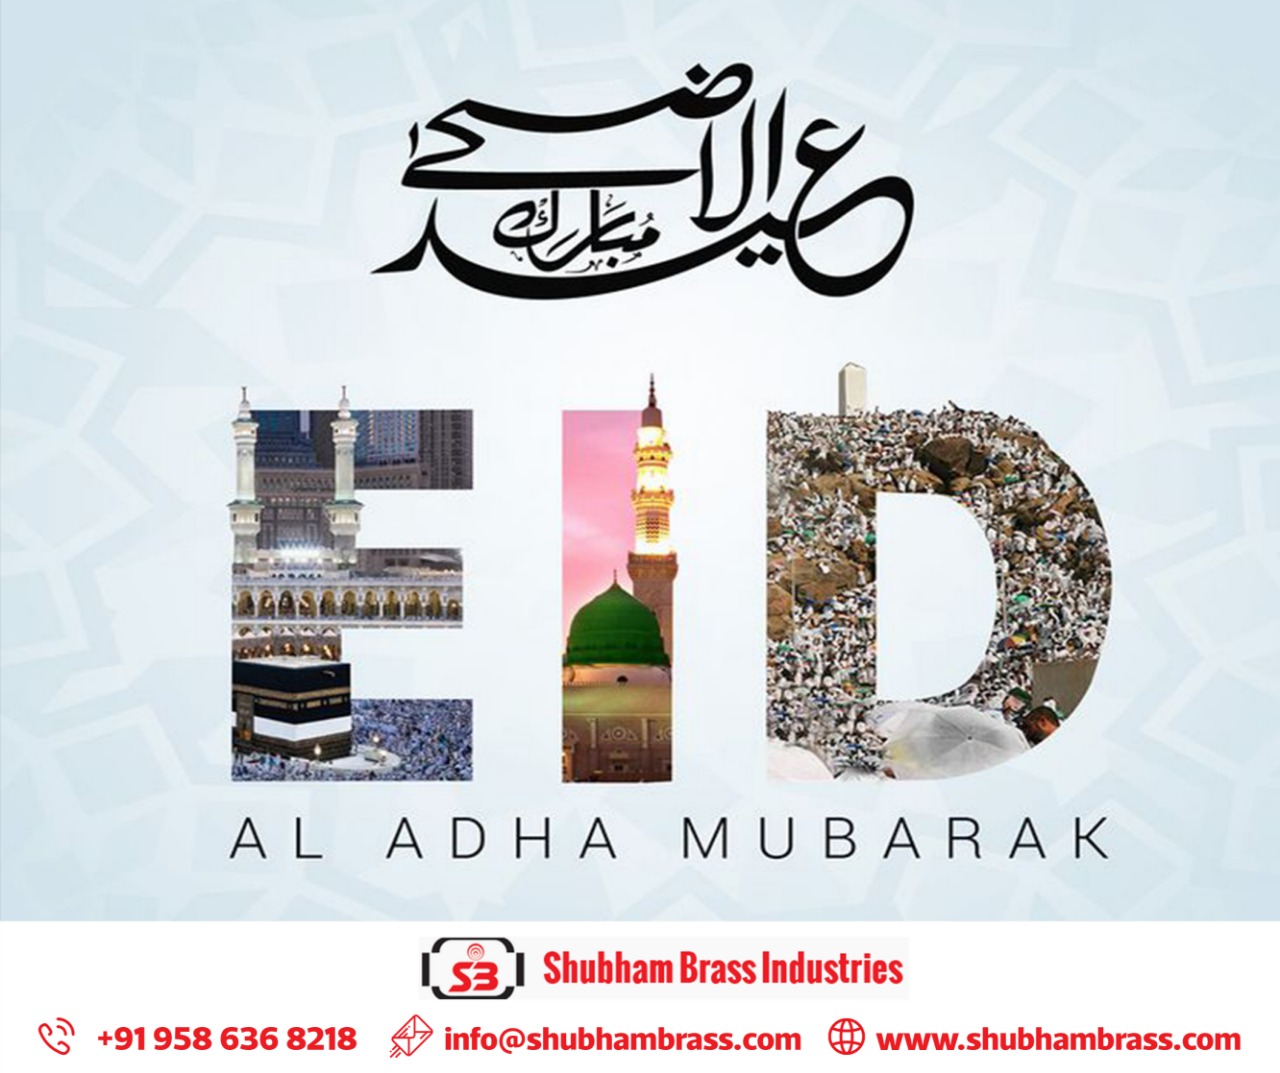 Subham Brass Industries - Wishes you on this auspicious festival of Eid